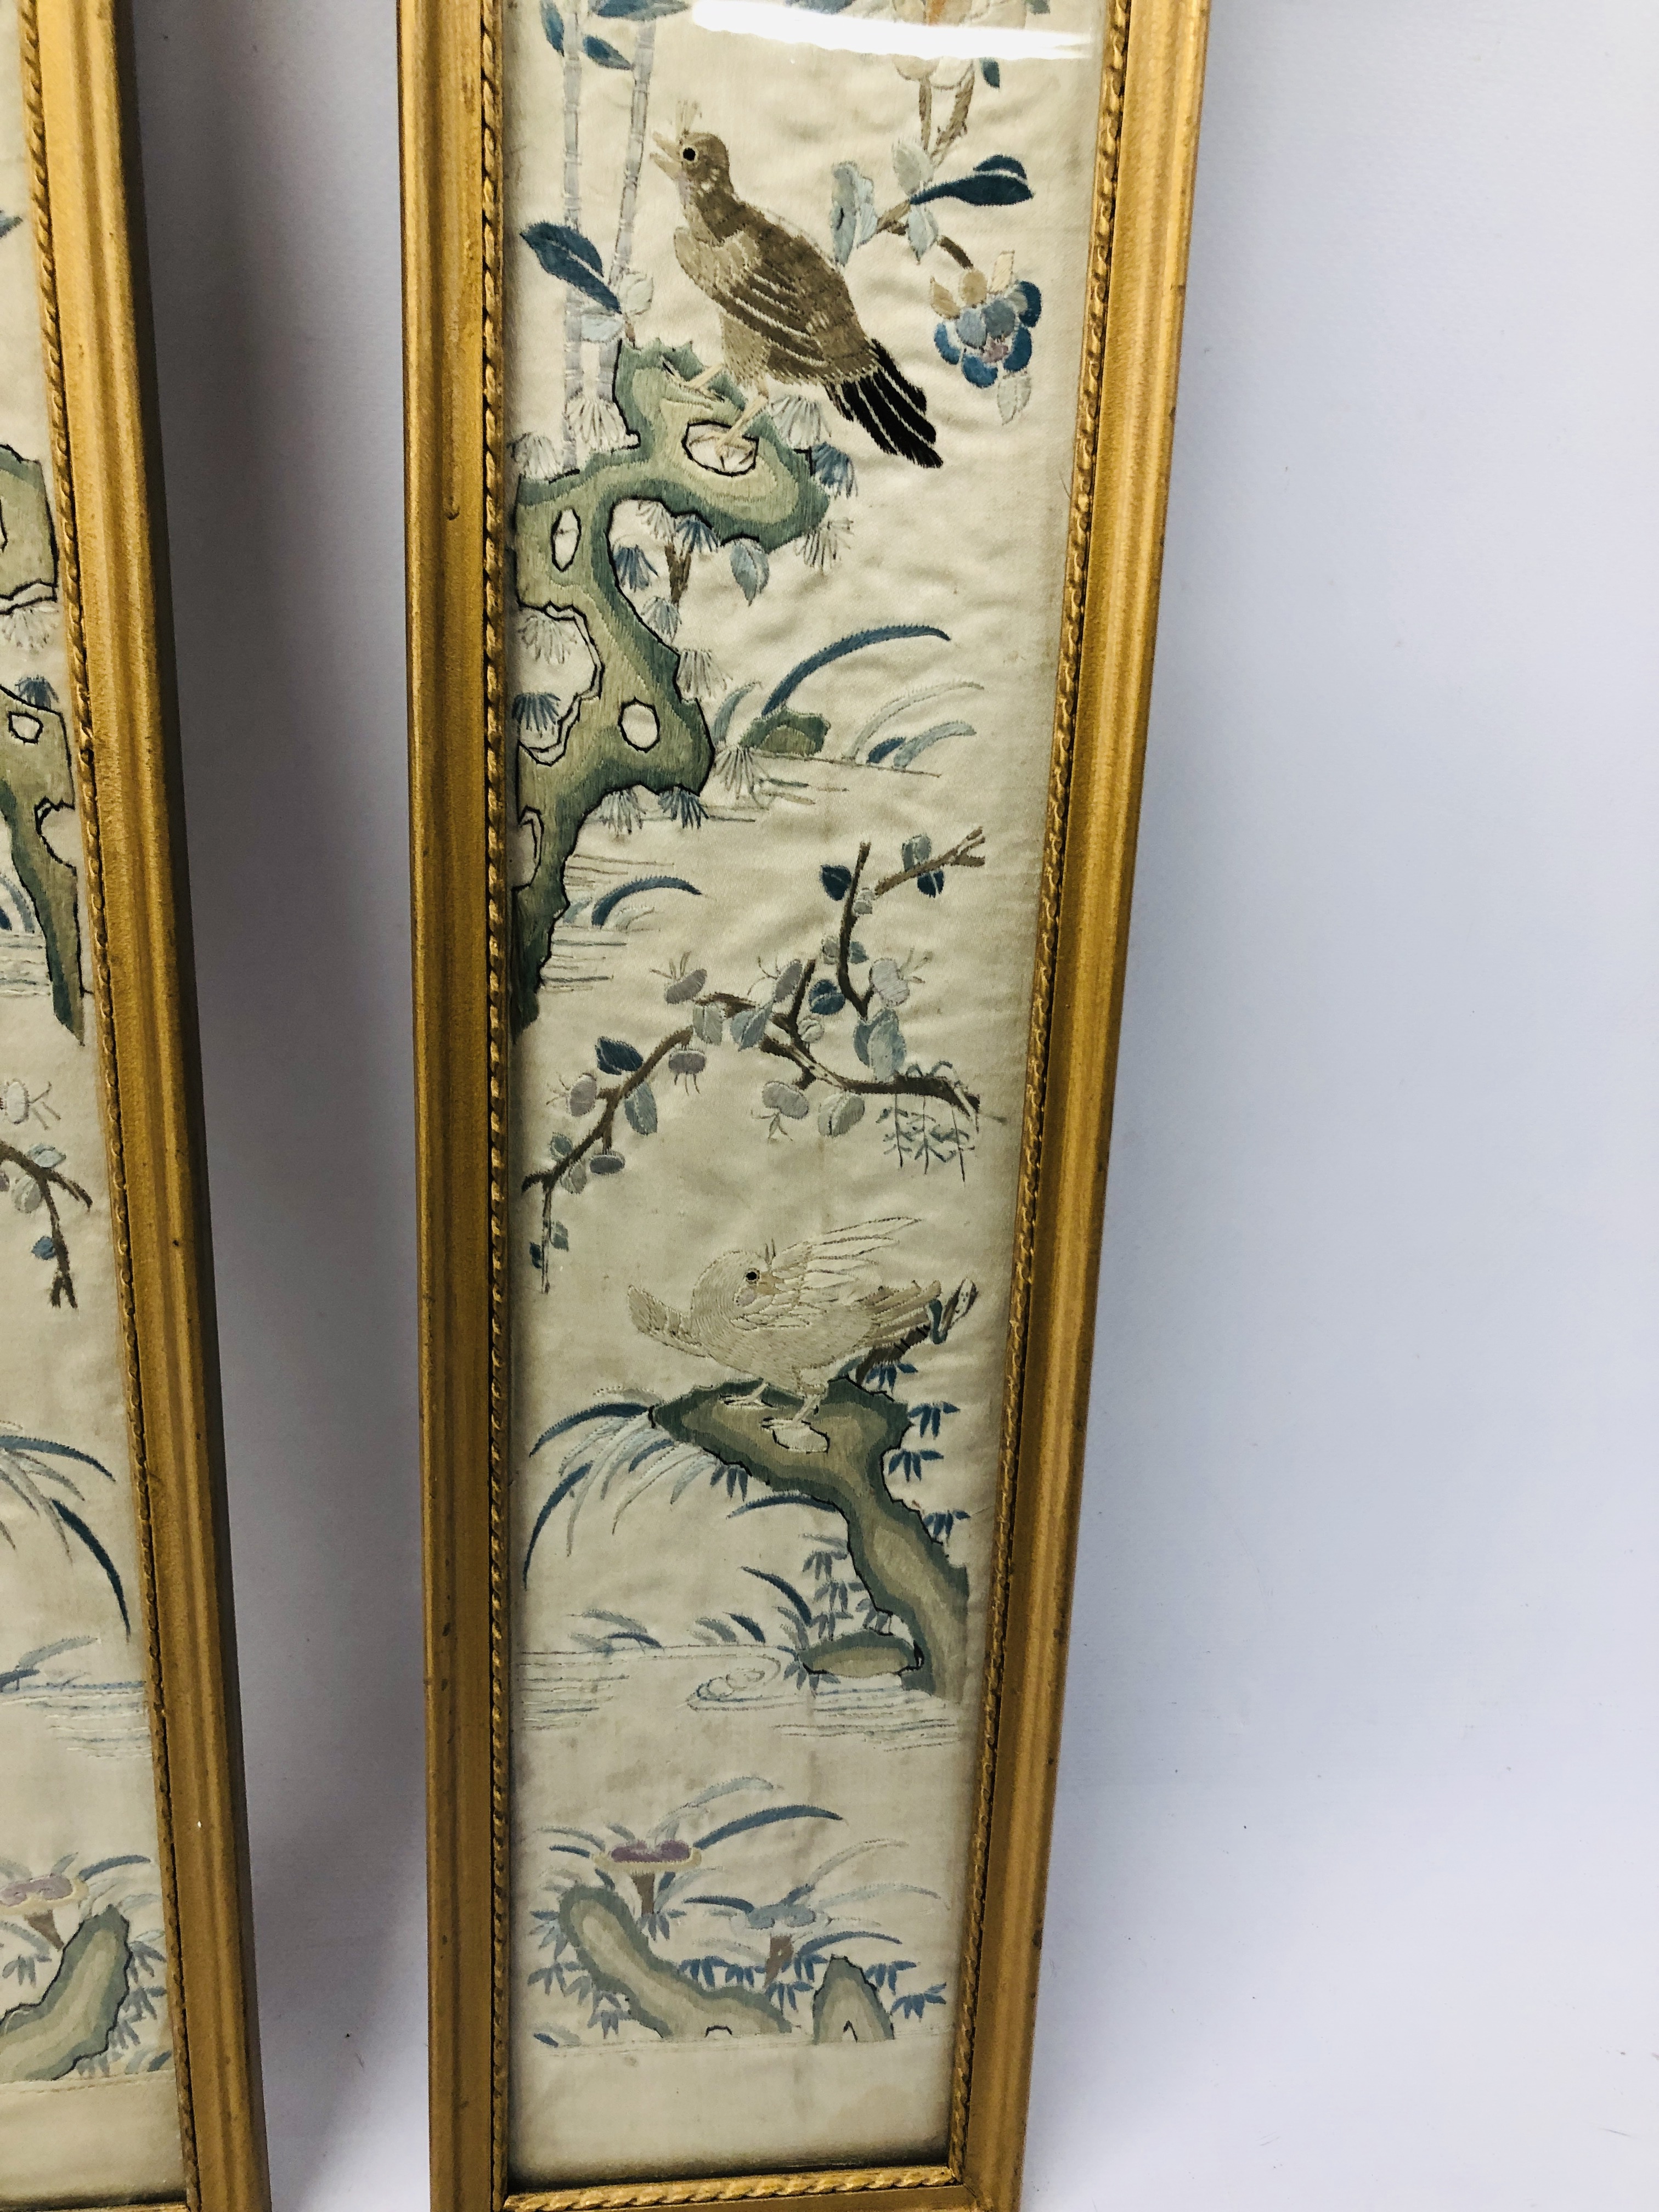 A PAIR OF C19TH CHINESE EMBROIDERIES OF BIRDS, ROCKS AND TREES EACH 54 X 9CM. - Image 5 of 5